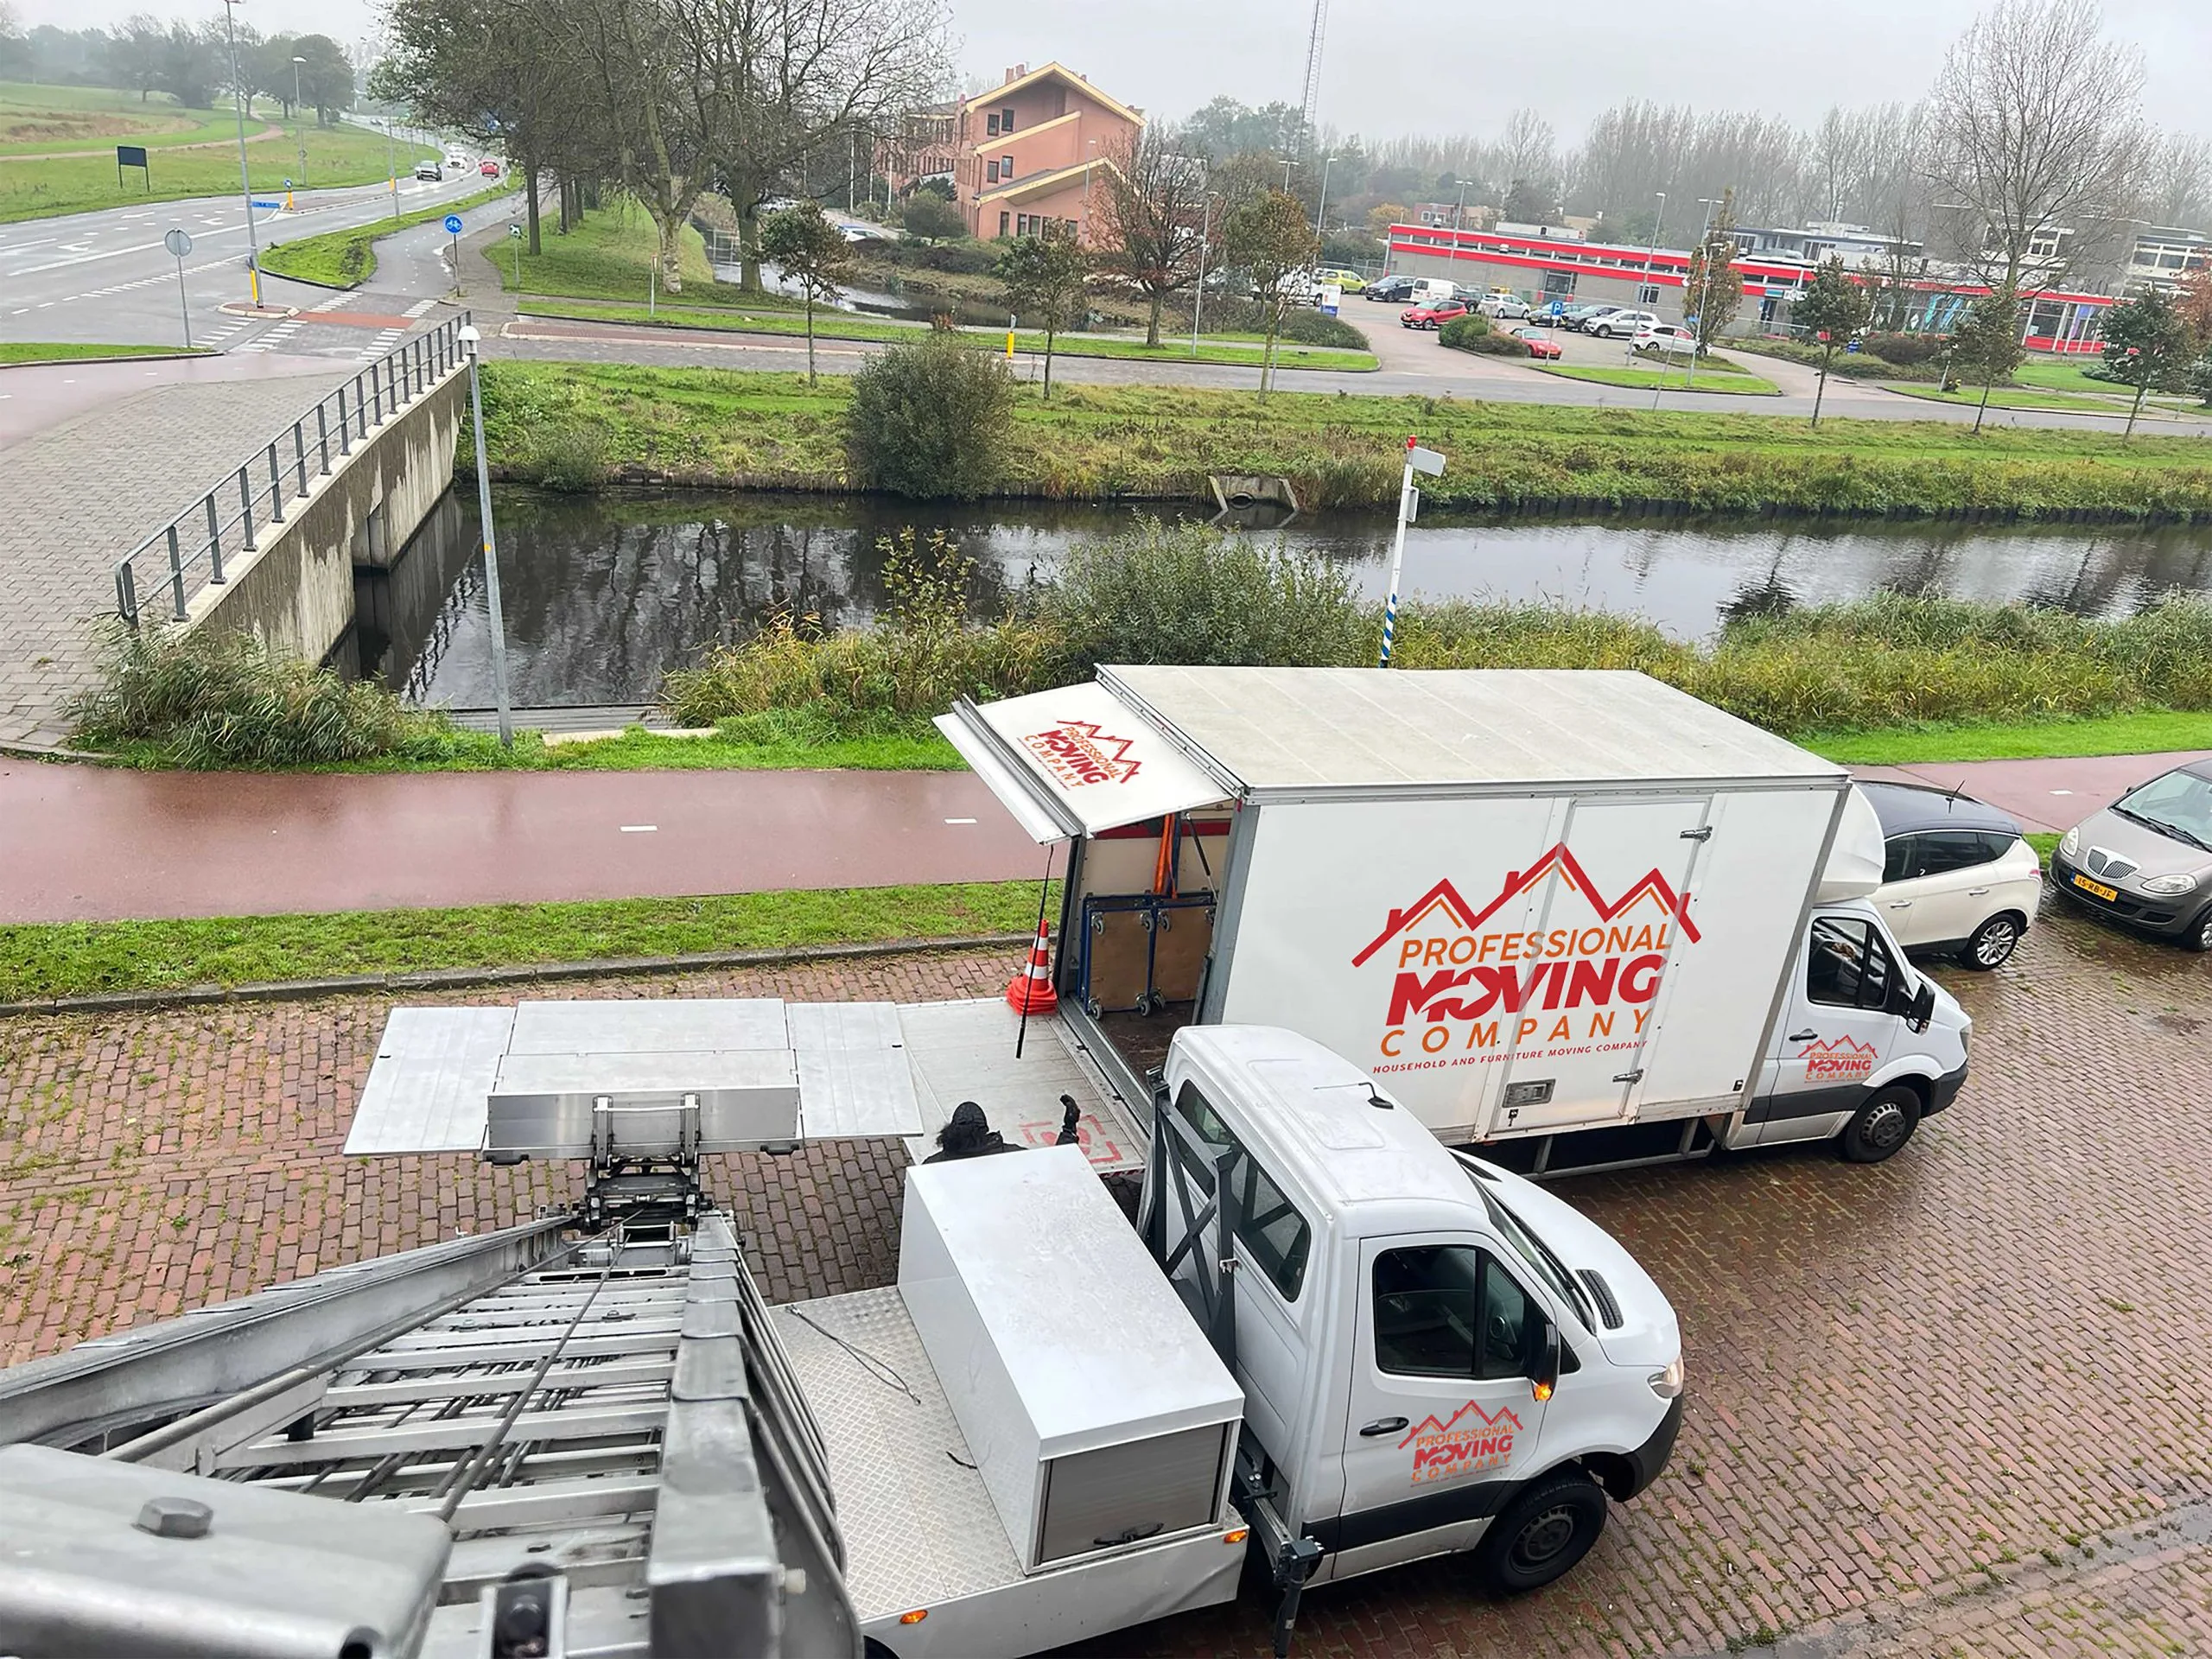 Moving Company Papendrecht Professional Moving Company 1